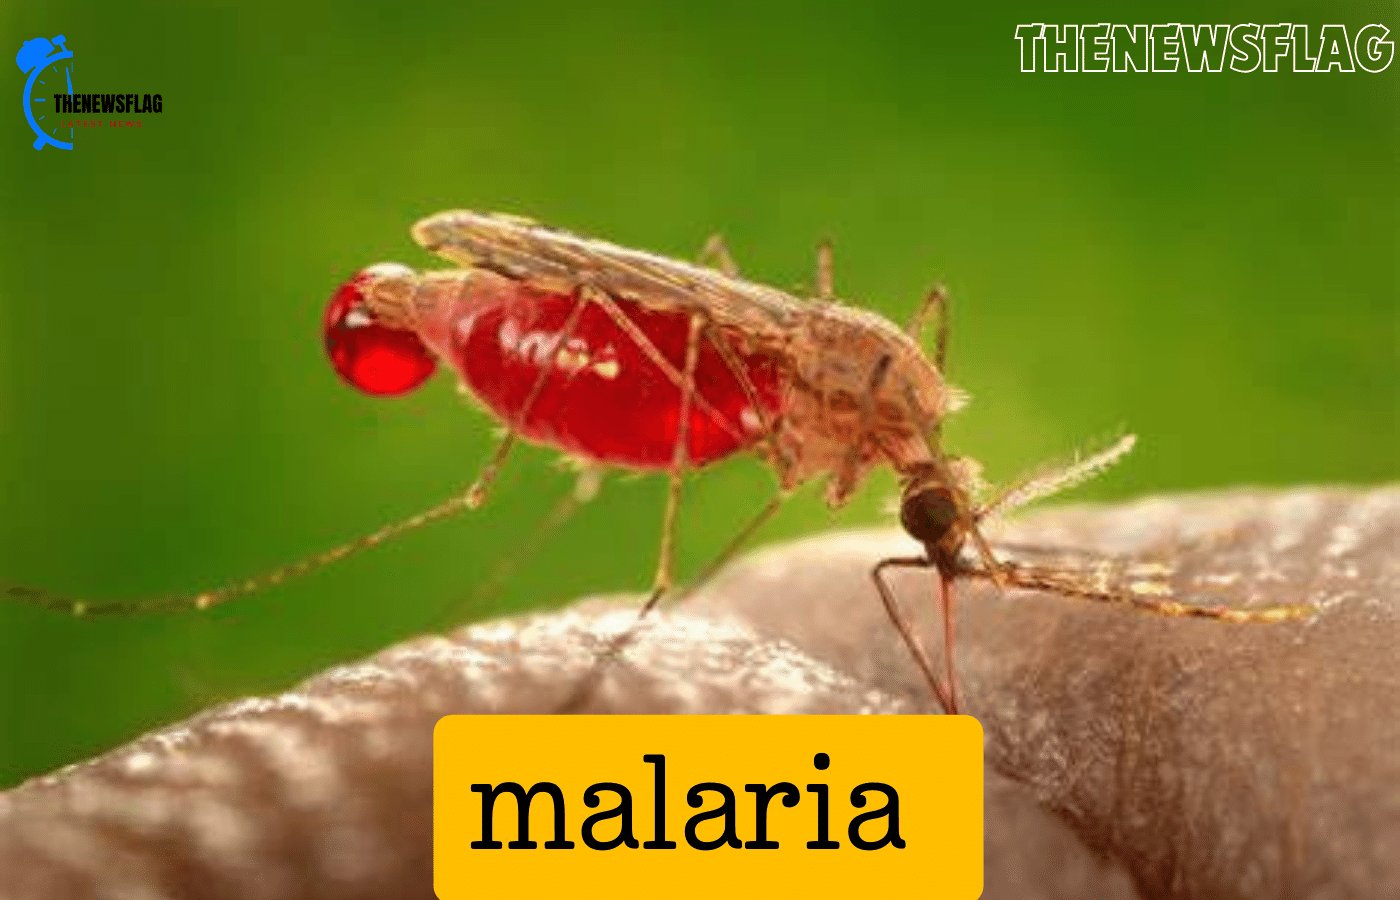 A new lethal mosquito species poses a threat to the fight against malaria.